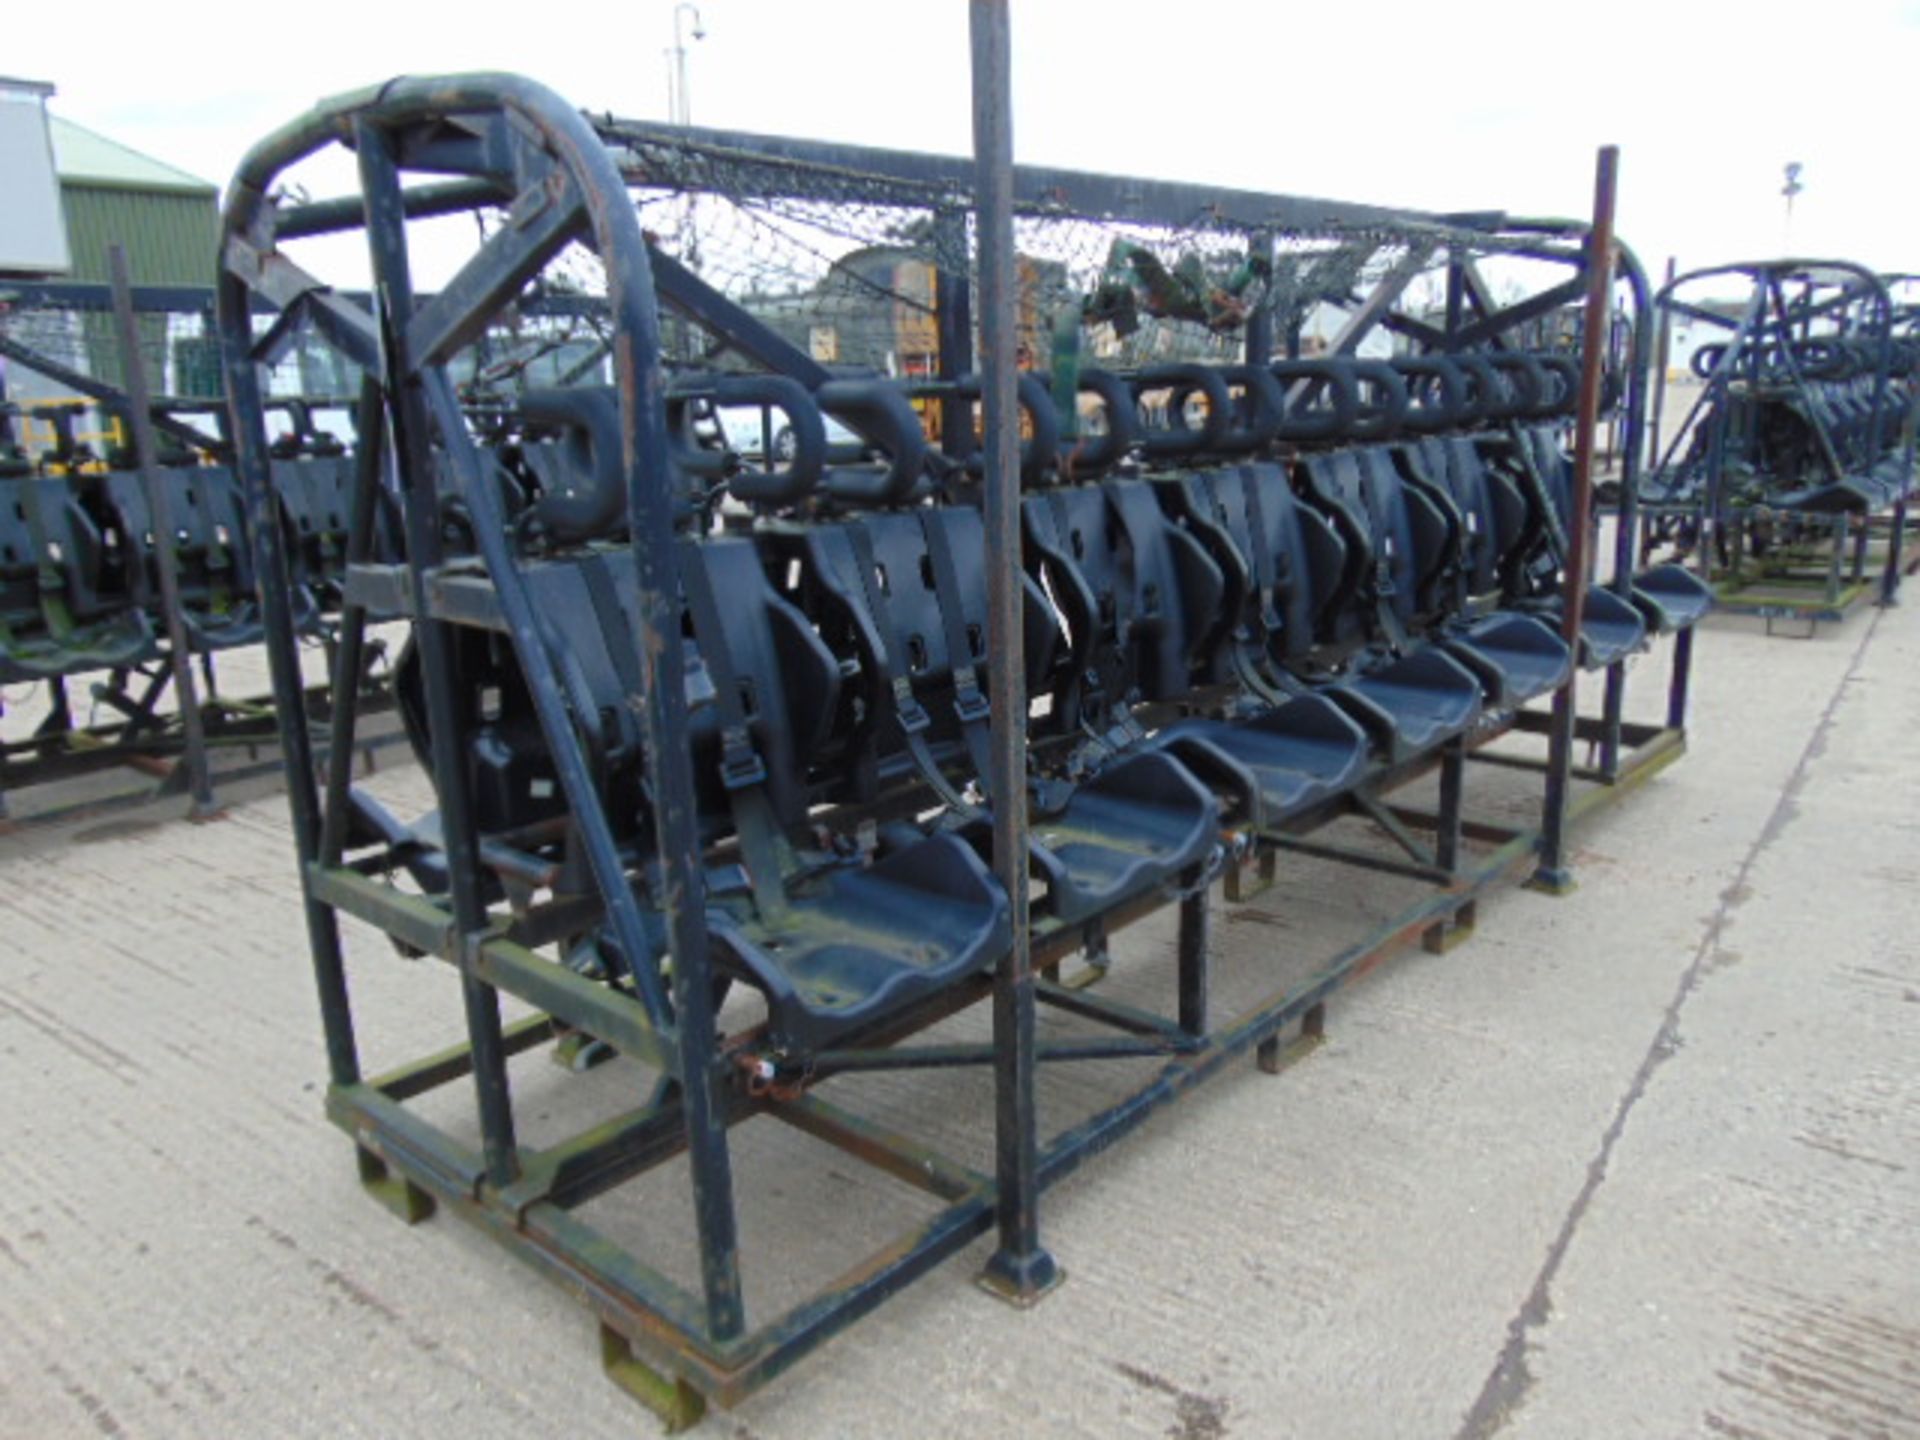 14 Man ROPS Security Seat suitable for Leyland Dafs, Bedfords etc - Image 4 of 6